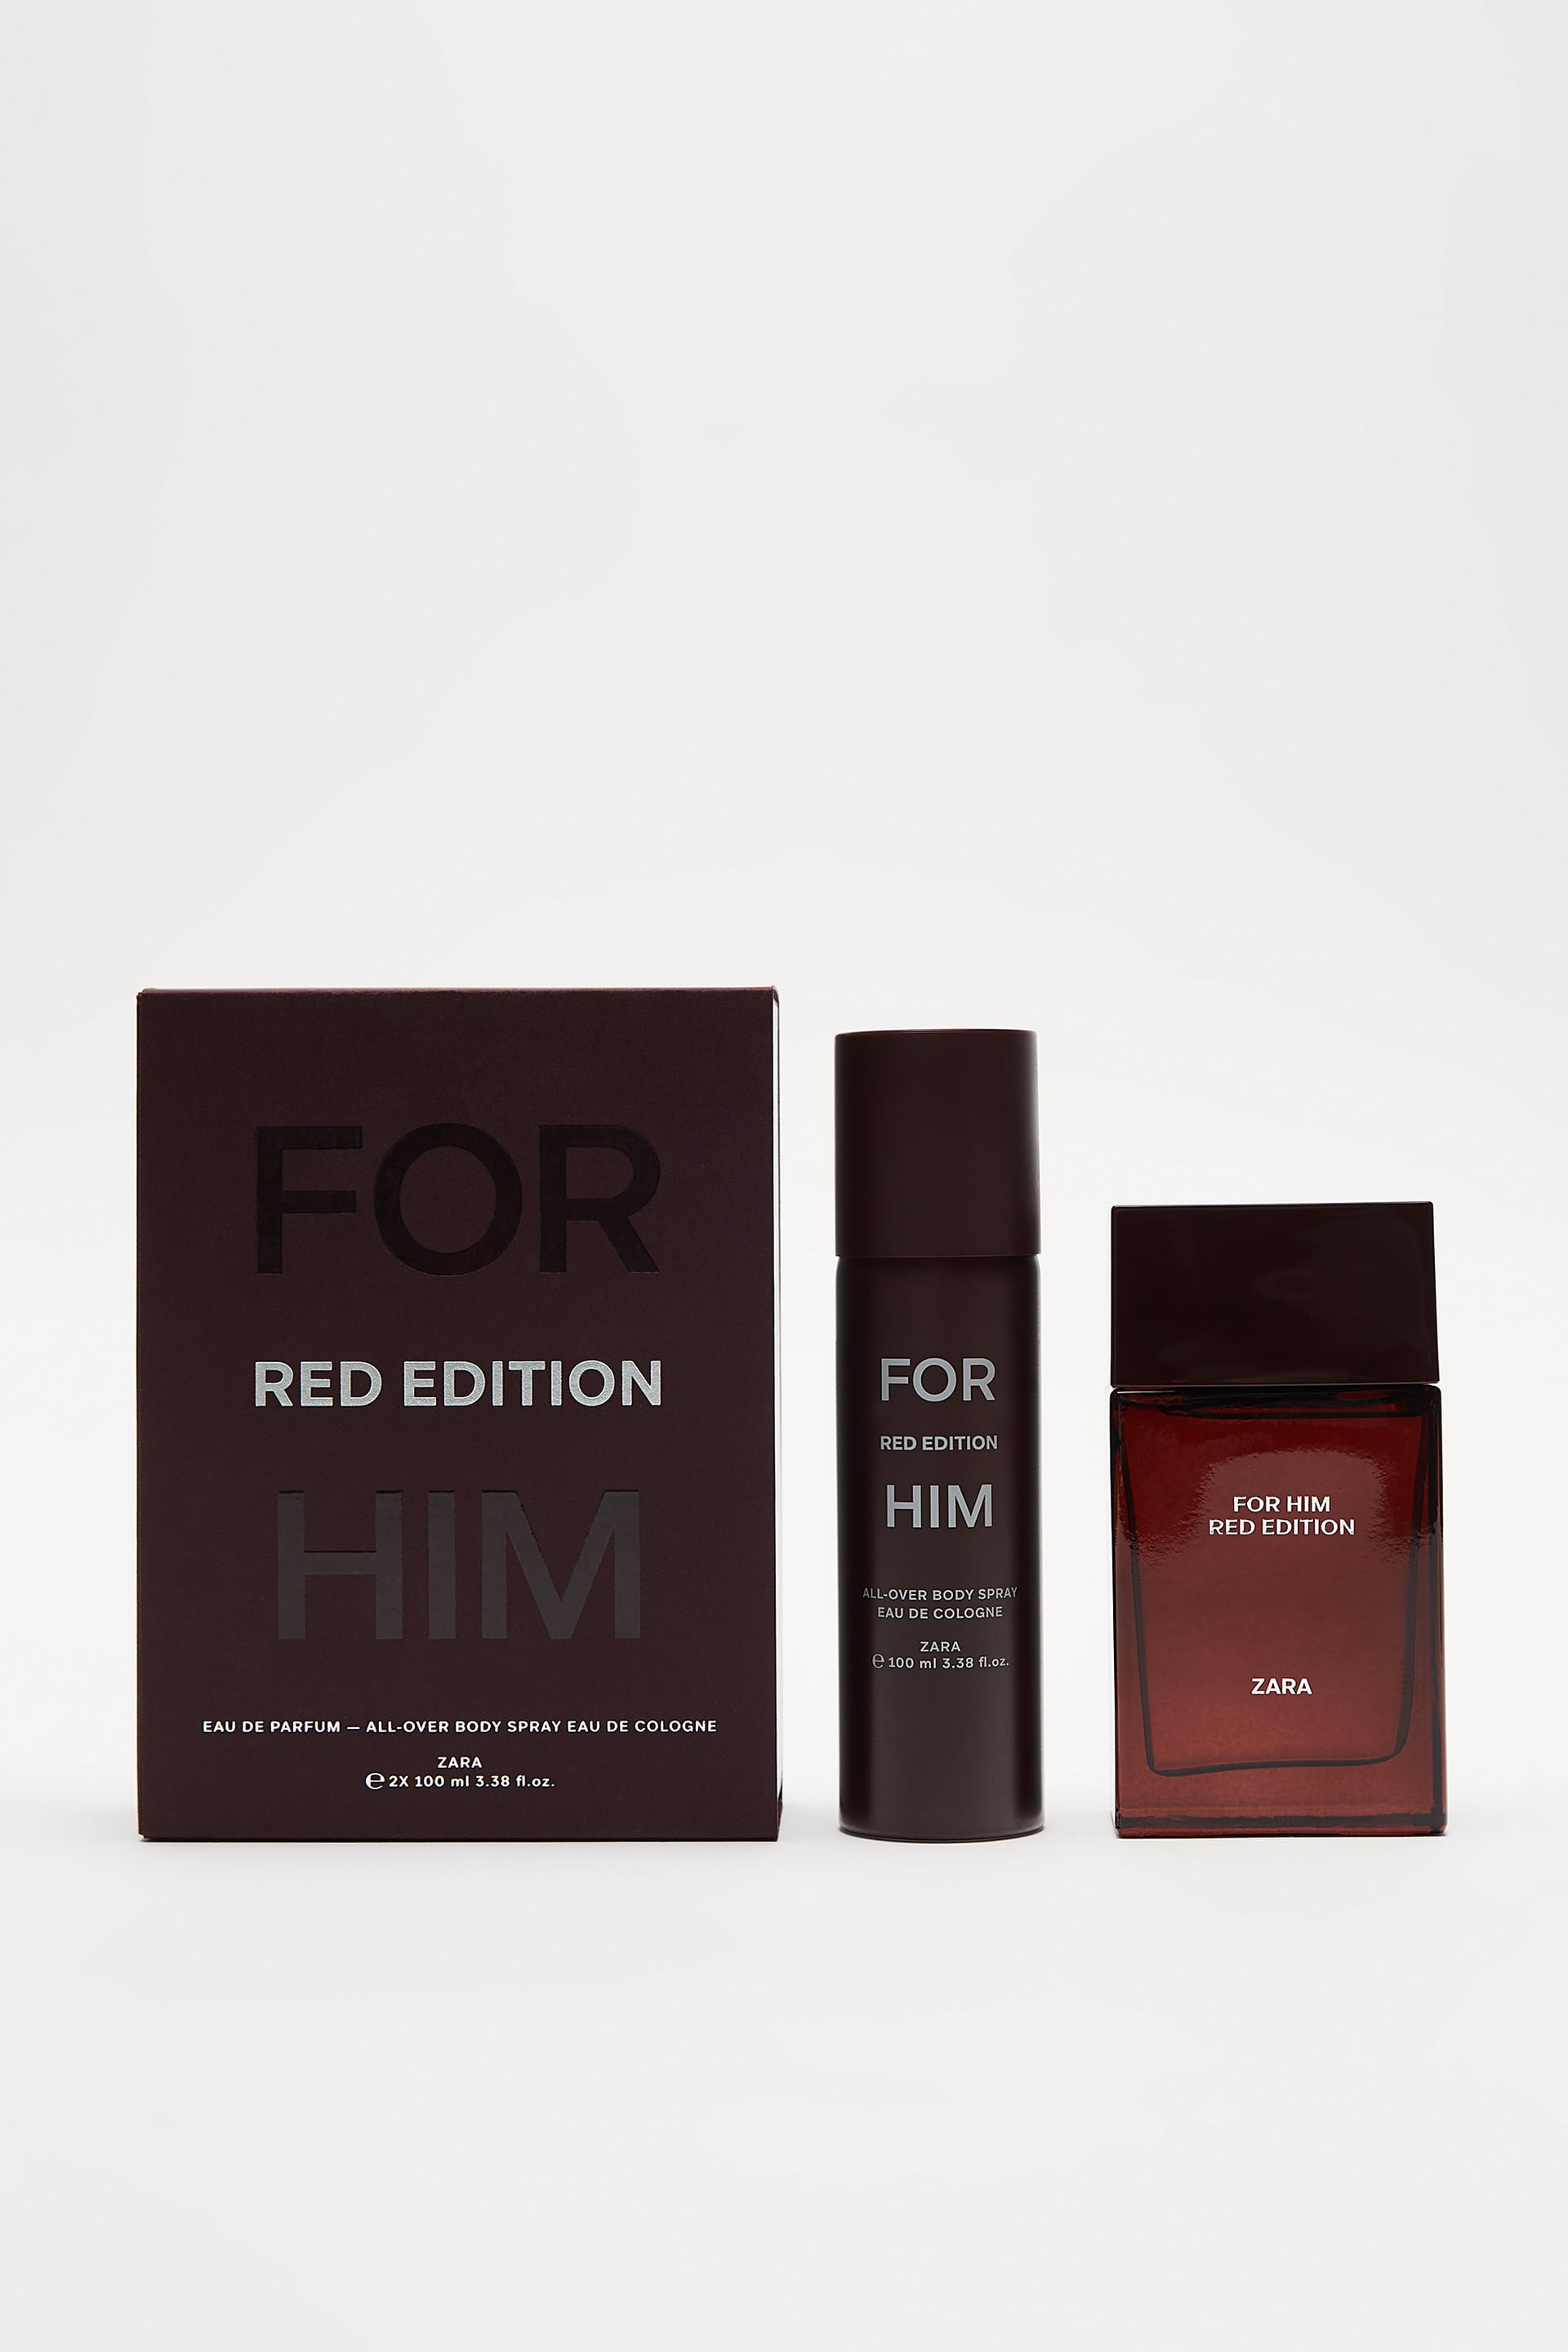 ZARA FOR HIM RED EDITION + ALL OVER SPRAY 100ML